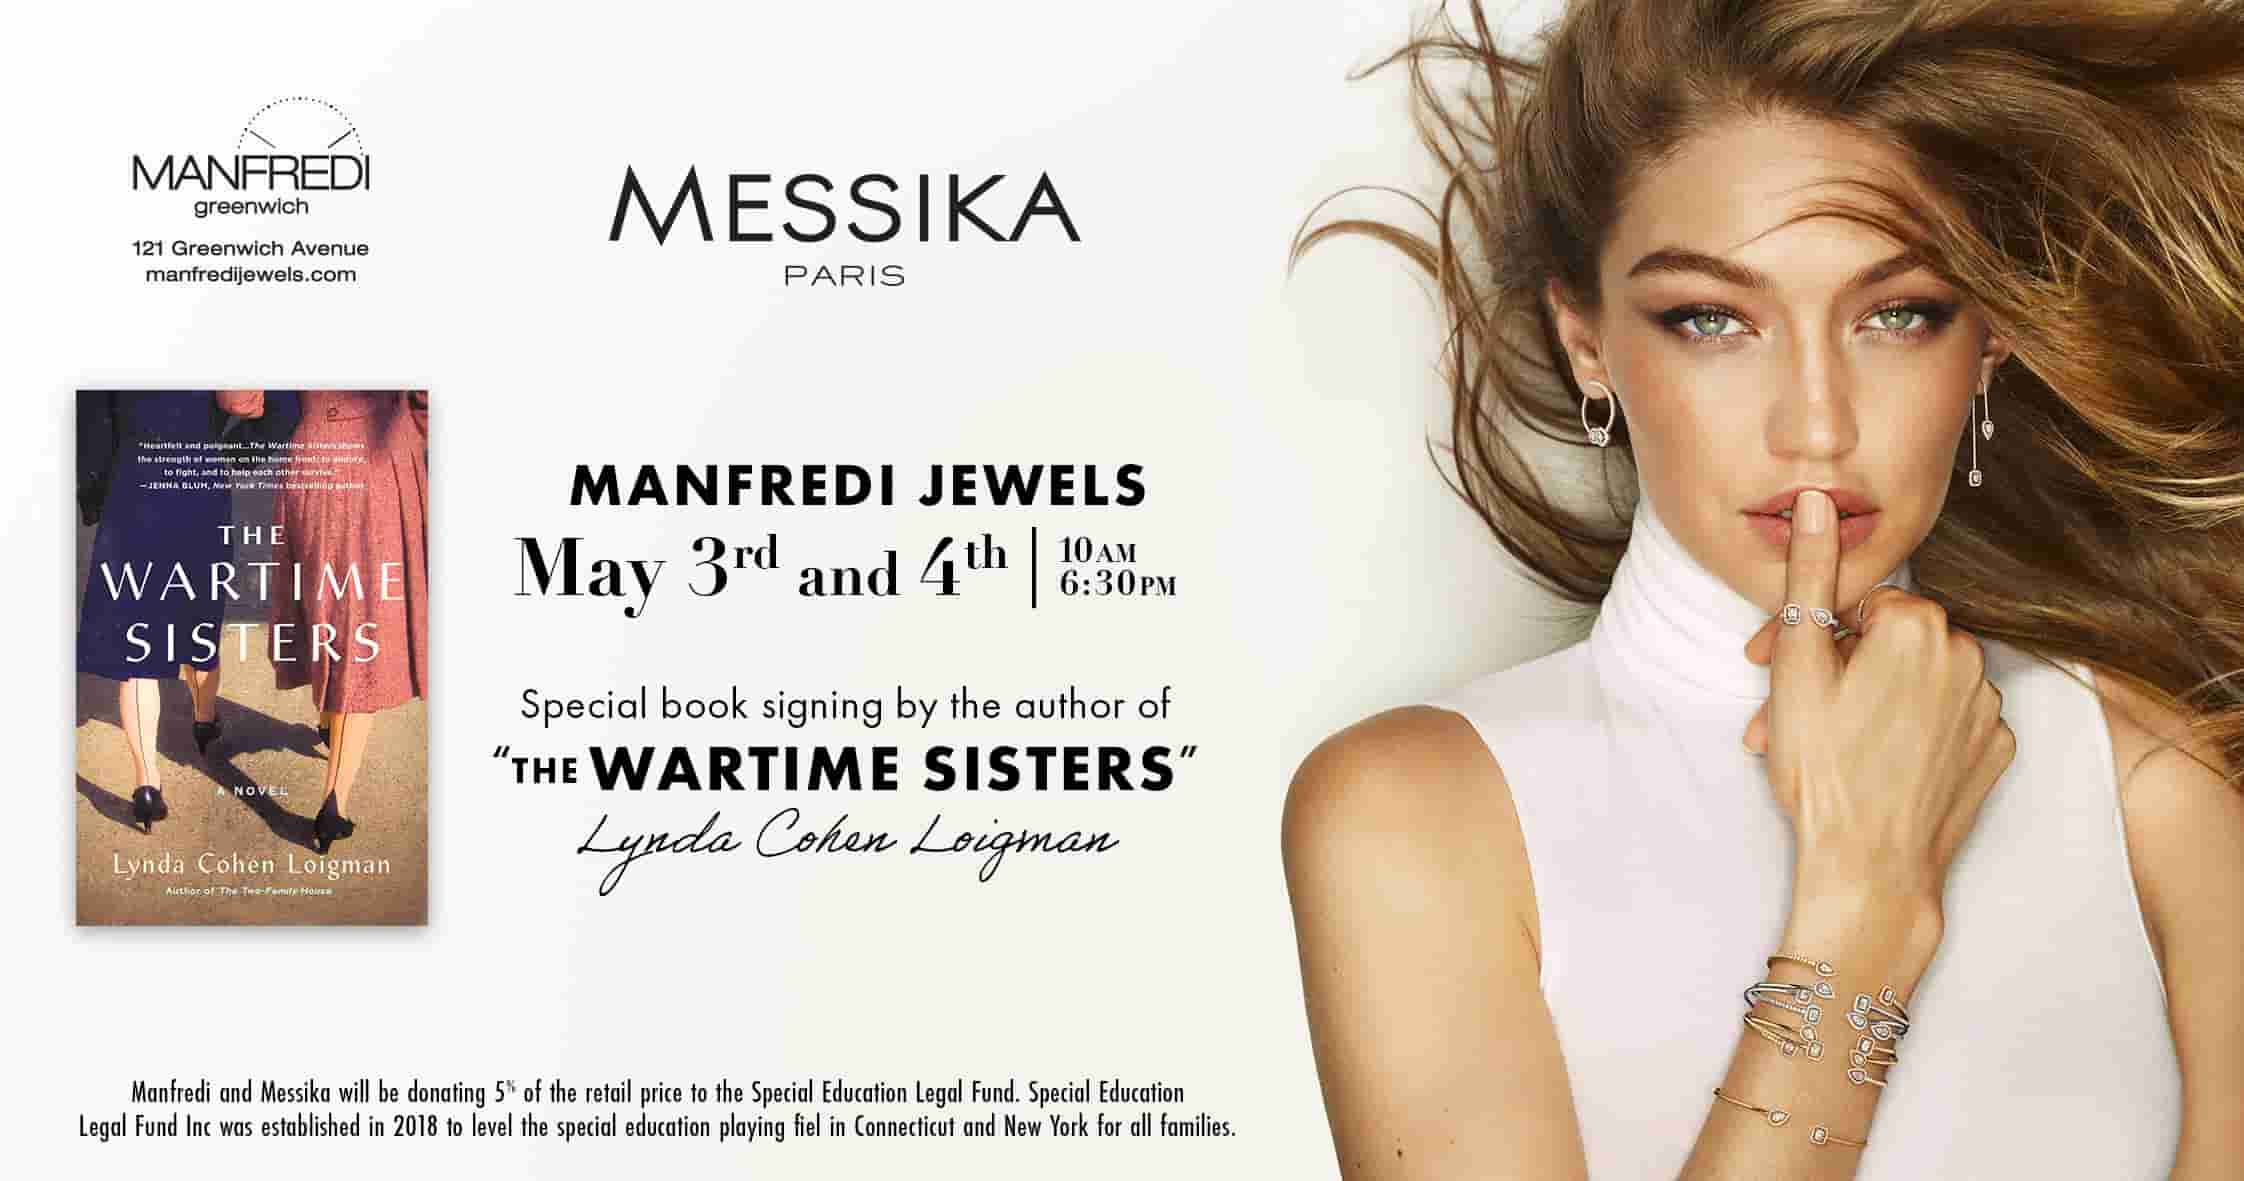 Messika Trunk Show and special book signing by Lynda Cohen Loigman....